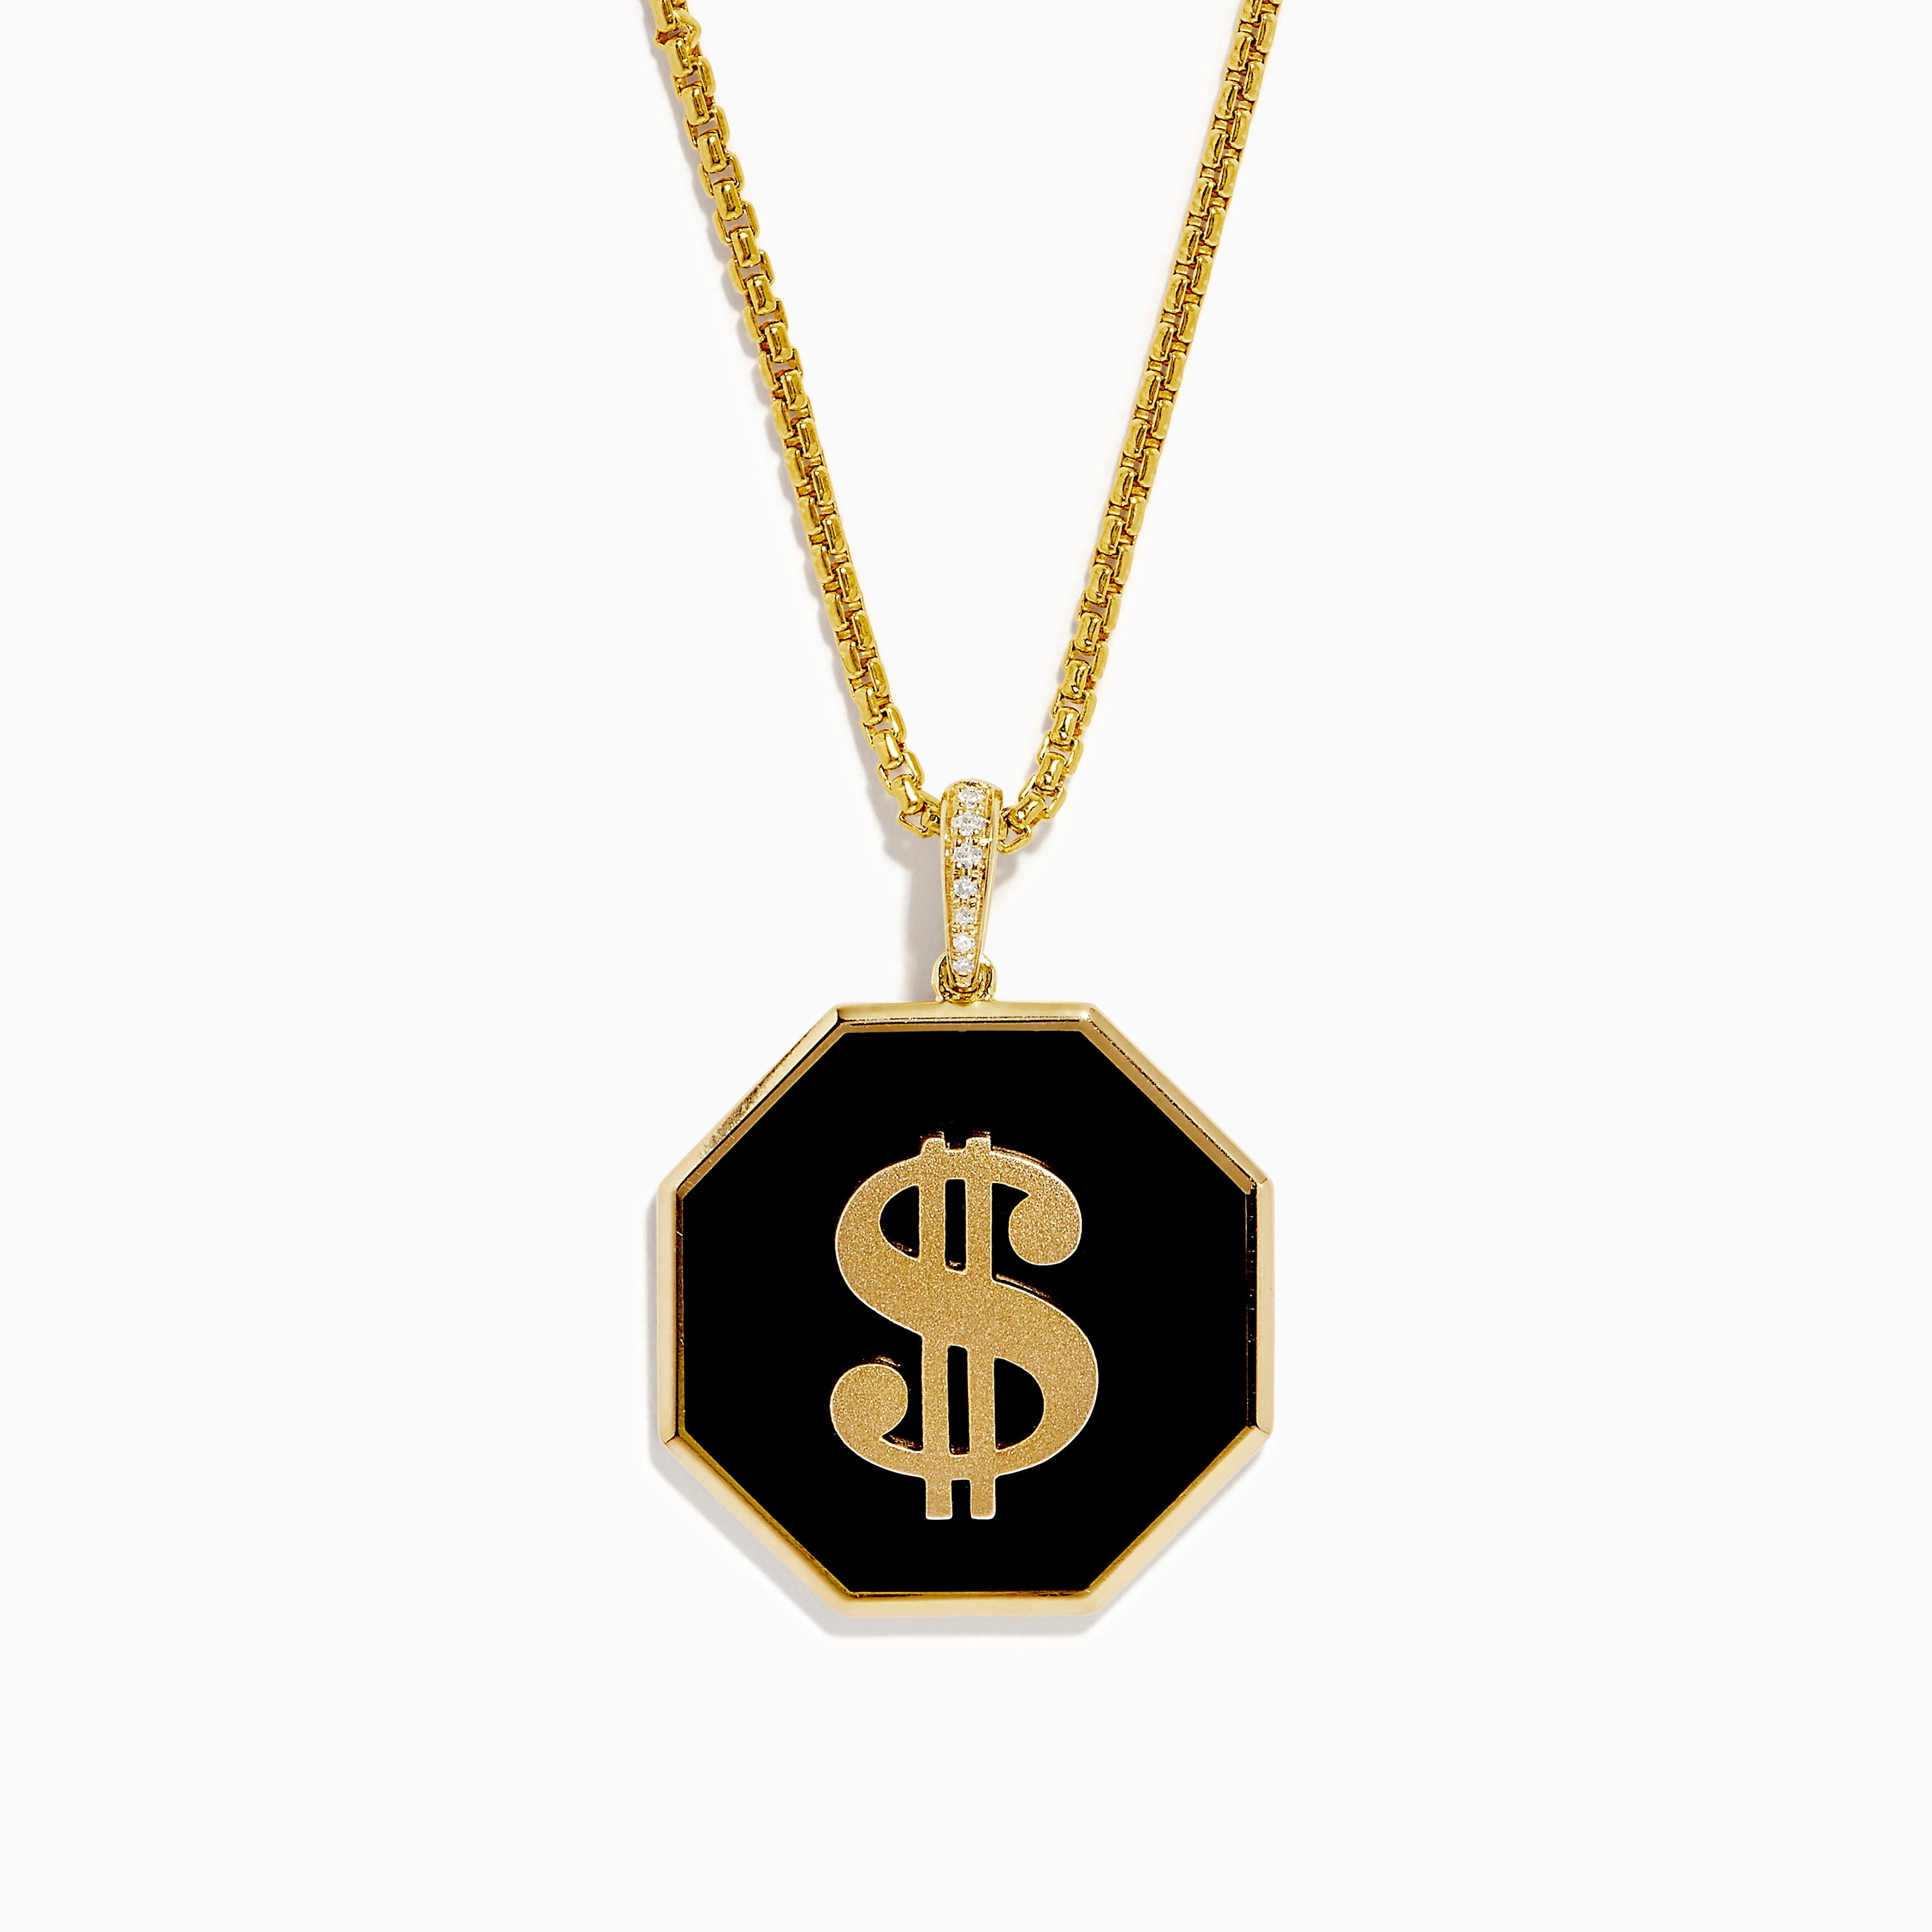 Effy Casino Men's Yellow Gold Plated Sterling Silver Dollar Sign Pendant